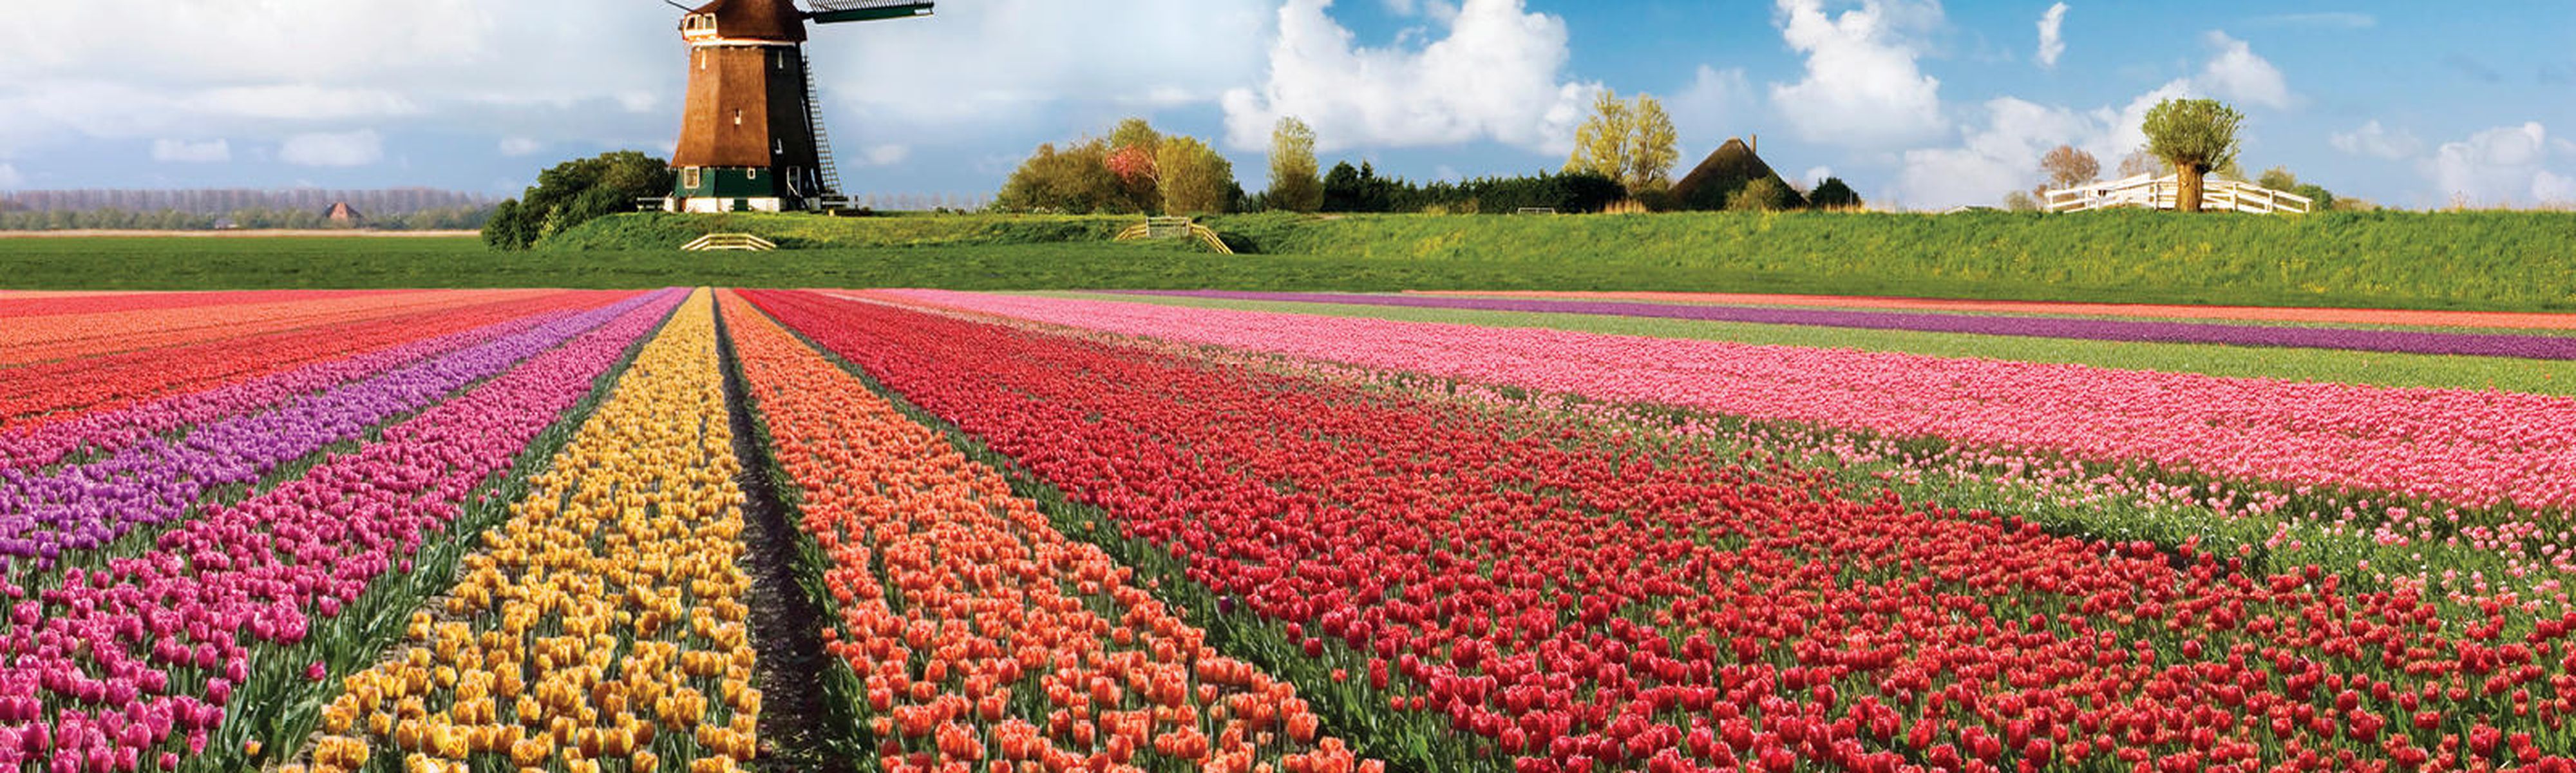 rows of red orange pink yellow and purple tulips in a field in amsterdam